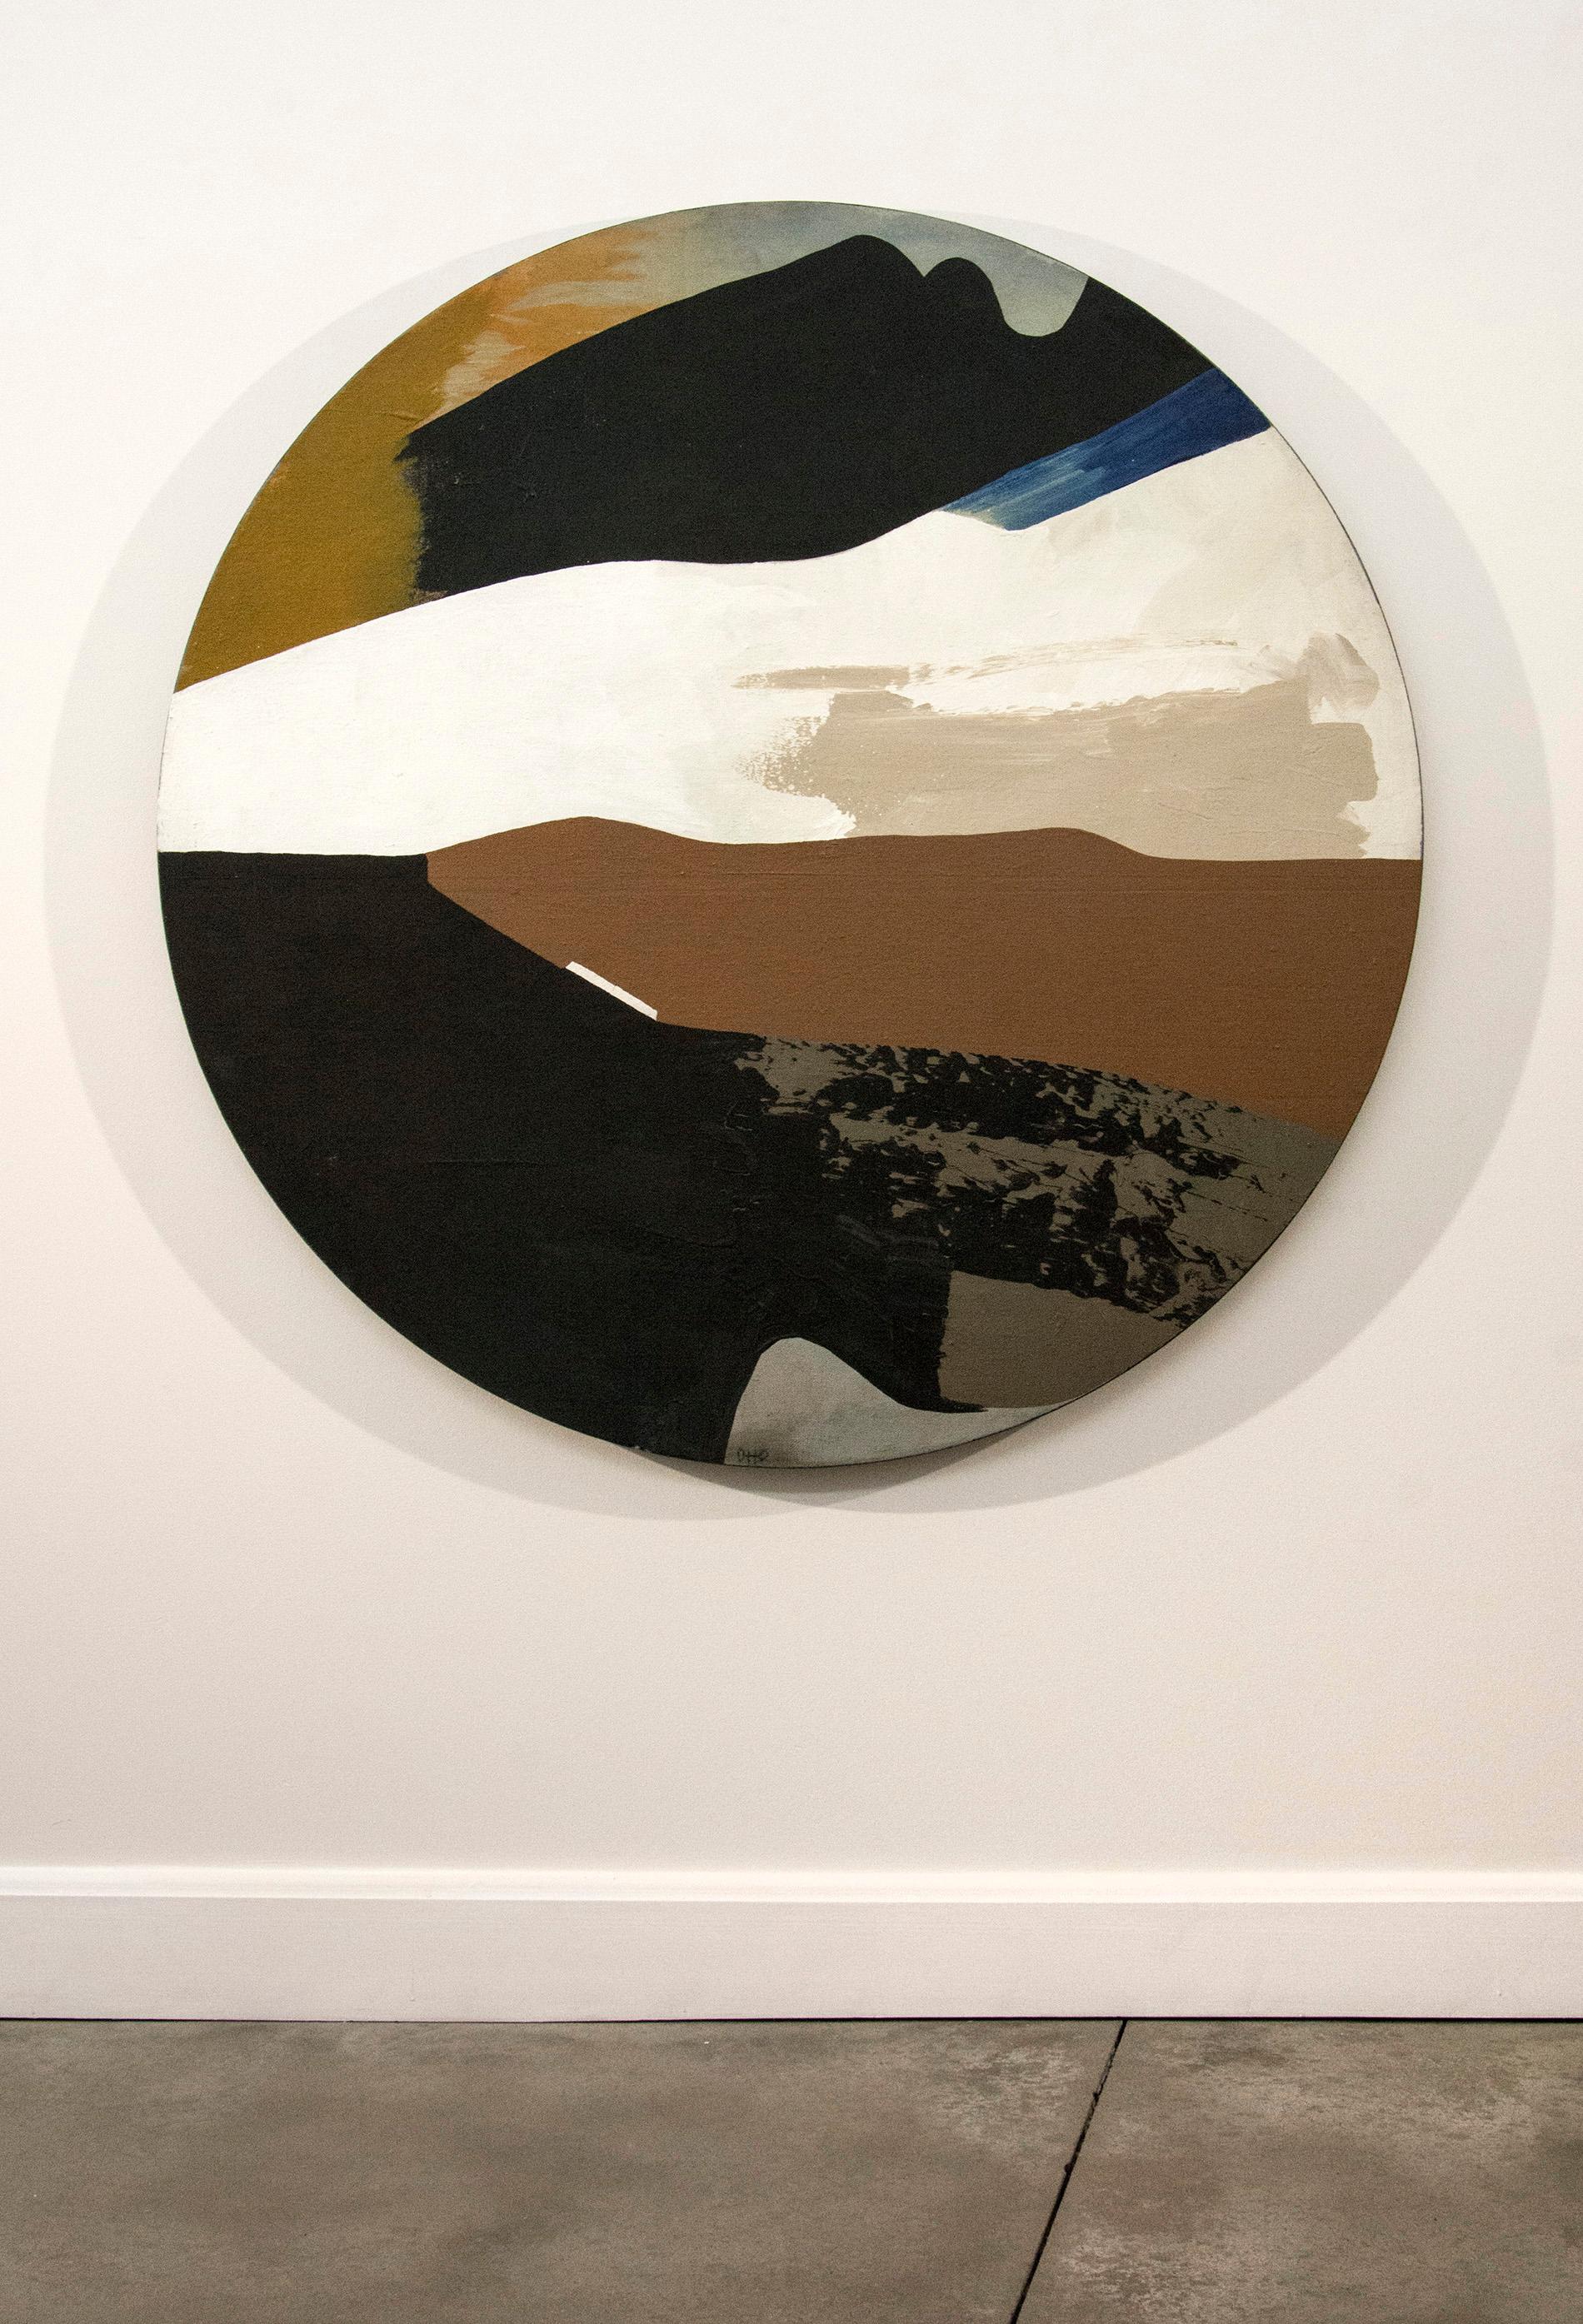 The dynamic beauty of the natural world inspired Canadian artist Otto Rogers. This striking painting’s waves of colour in earthy tones of blue, gold, brown, black and white is enhanced by its circular form. Saskatchewan born (1935-2019) Rogers was